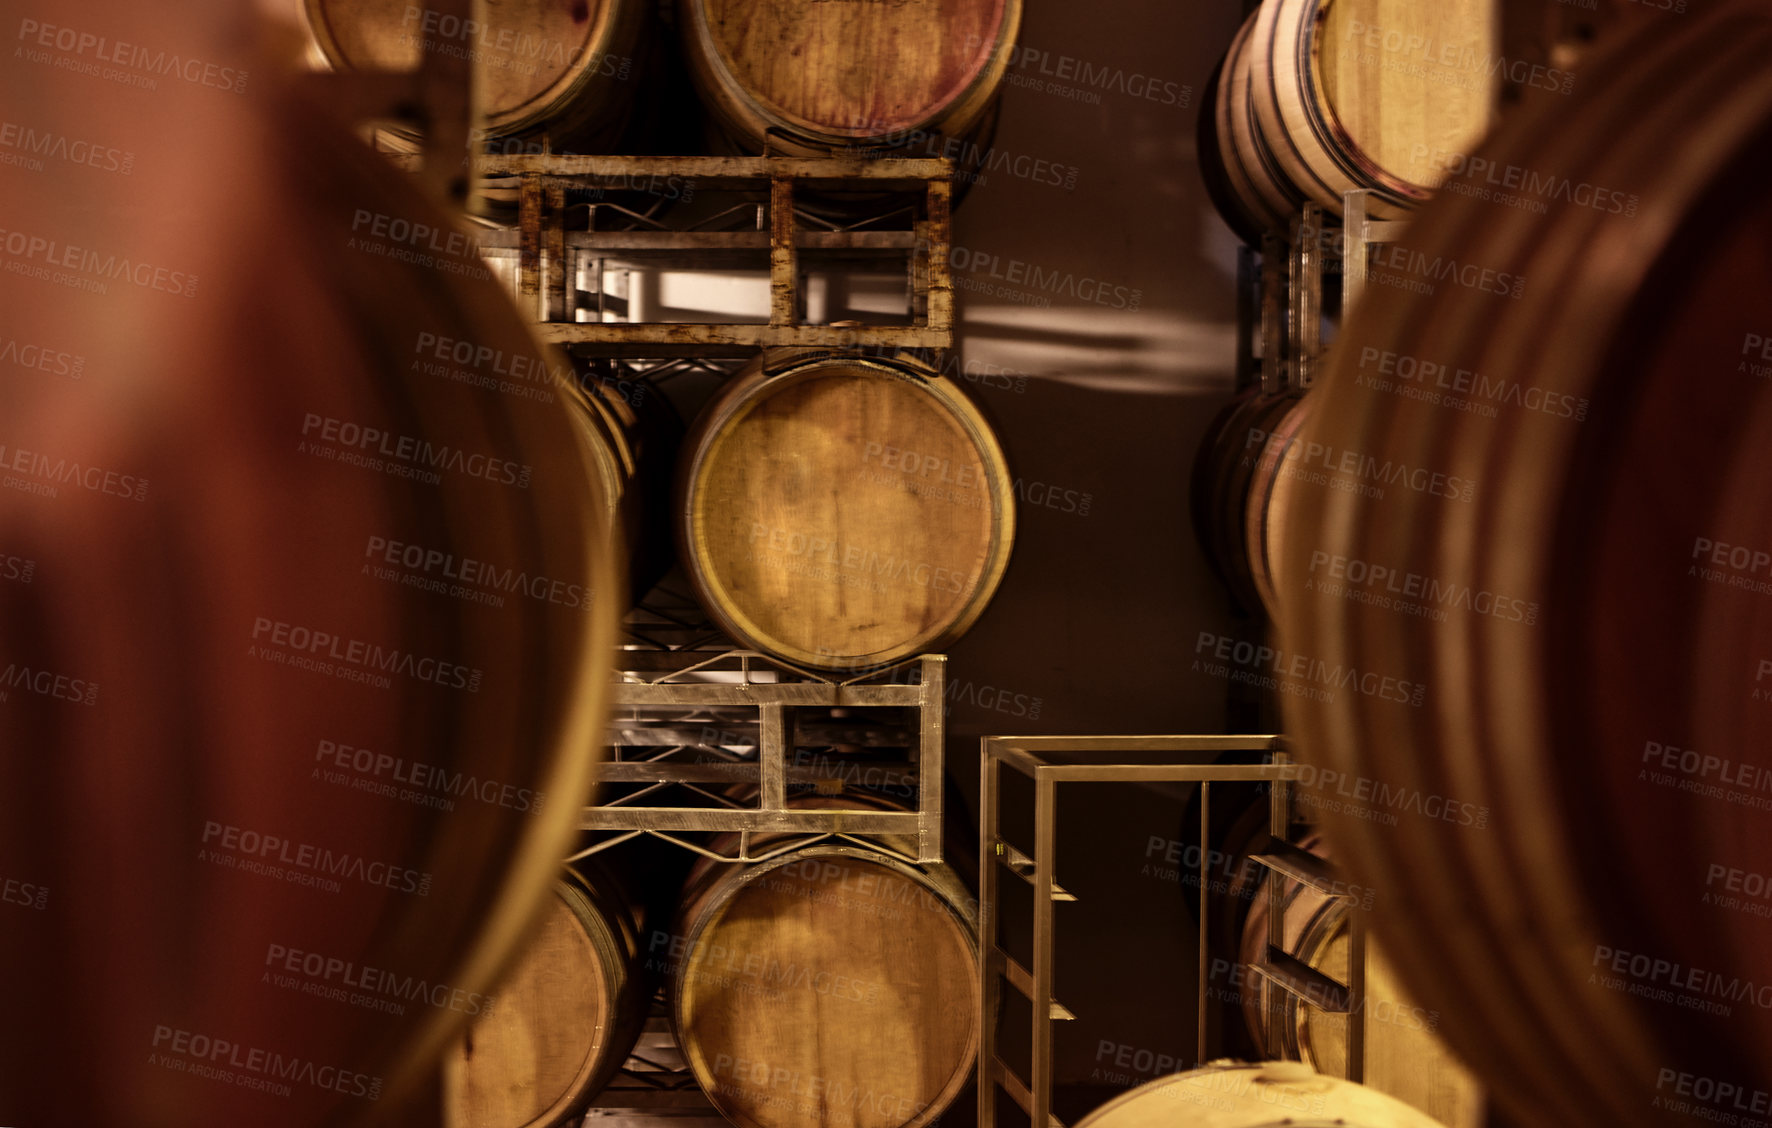 Buy stock photo Cropped shot of a wine barrels in a storehouse